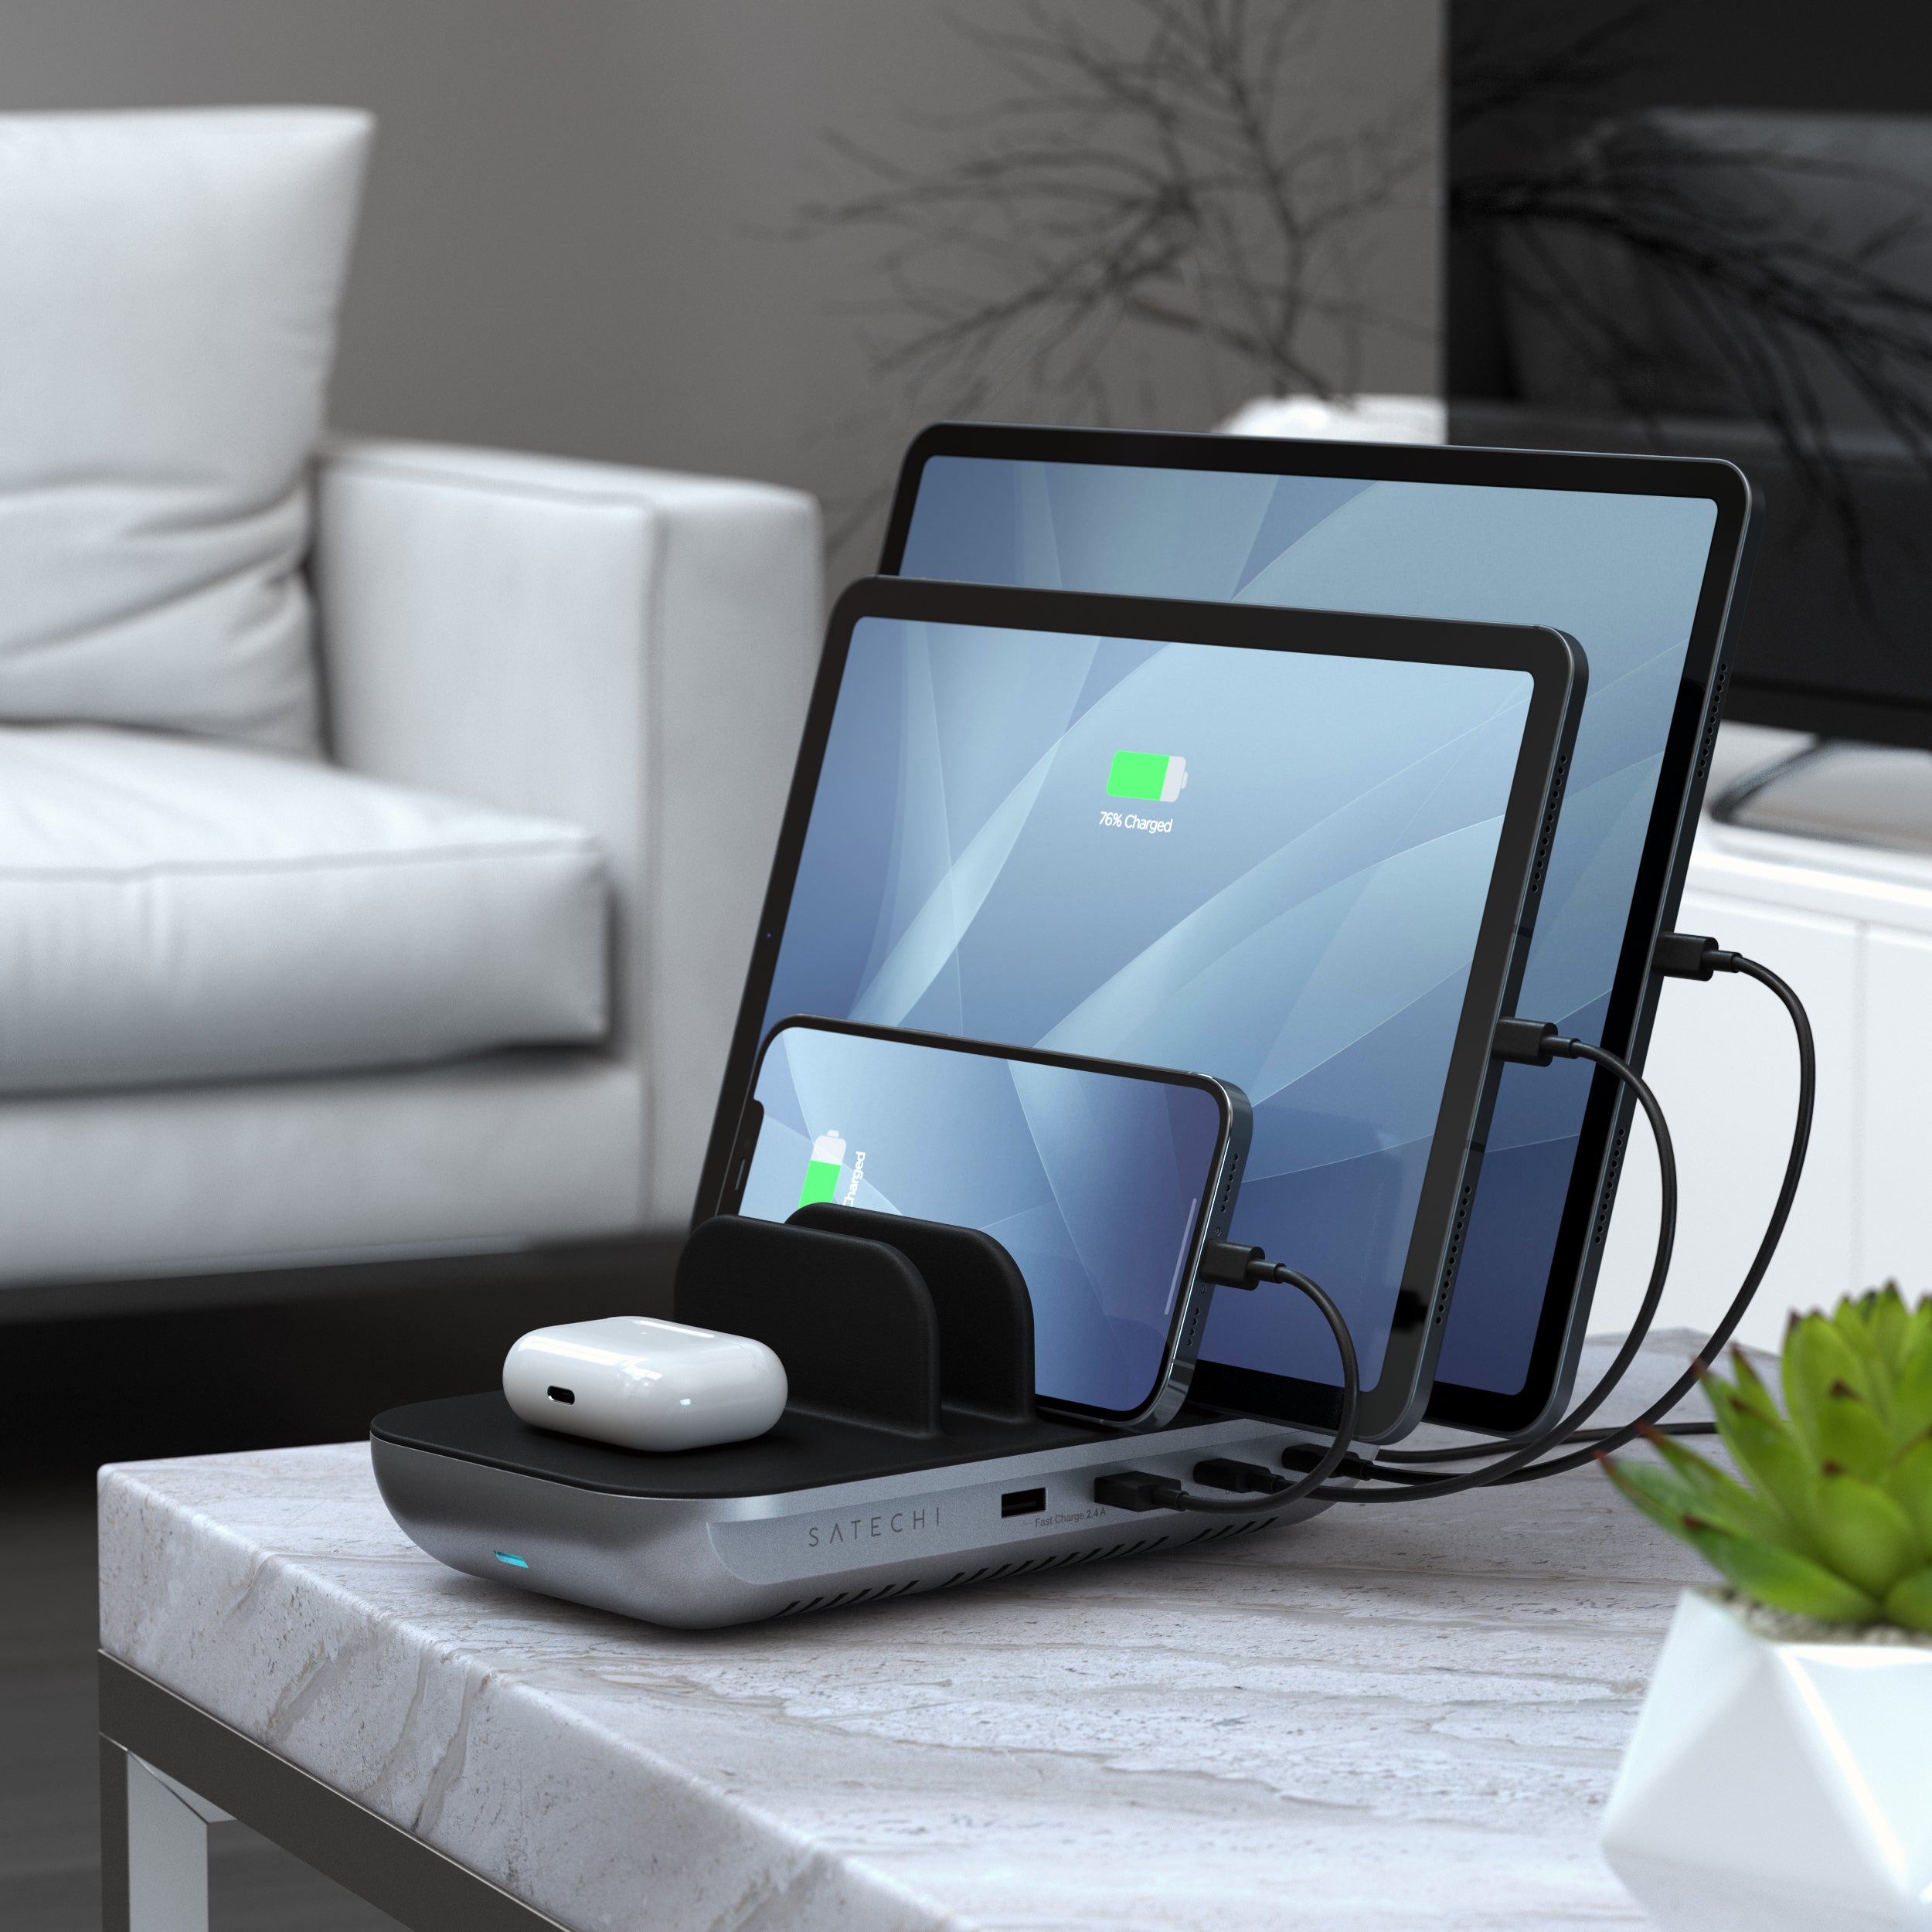 Create your own modern charging space while keeping all your electronics organized with the Satechi Dock5 Multi-Device Charging Station with Wireless Charging. Ideal for family homes, workspaces, classrooms, and more, the Charging Station powers five USB devices at the same time with two USB-C PD ports, two USB-A ports, and a designated Qi wireless charging pad.